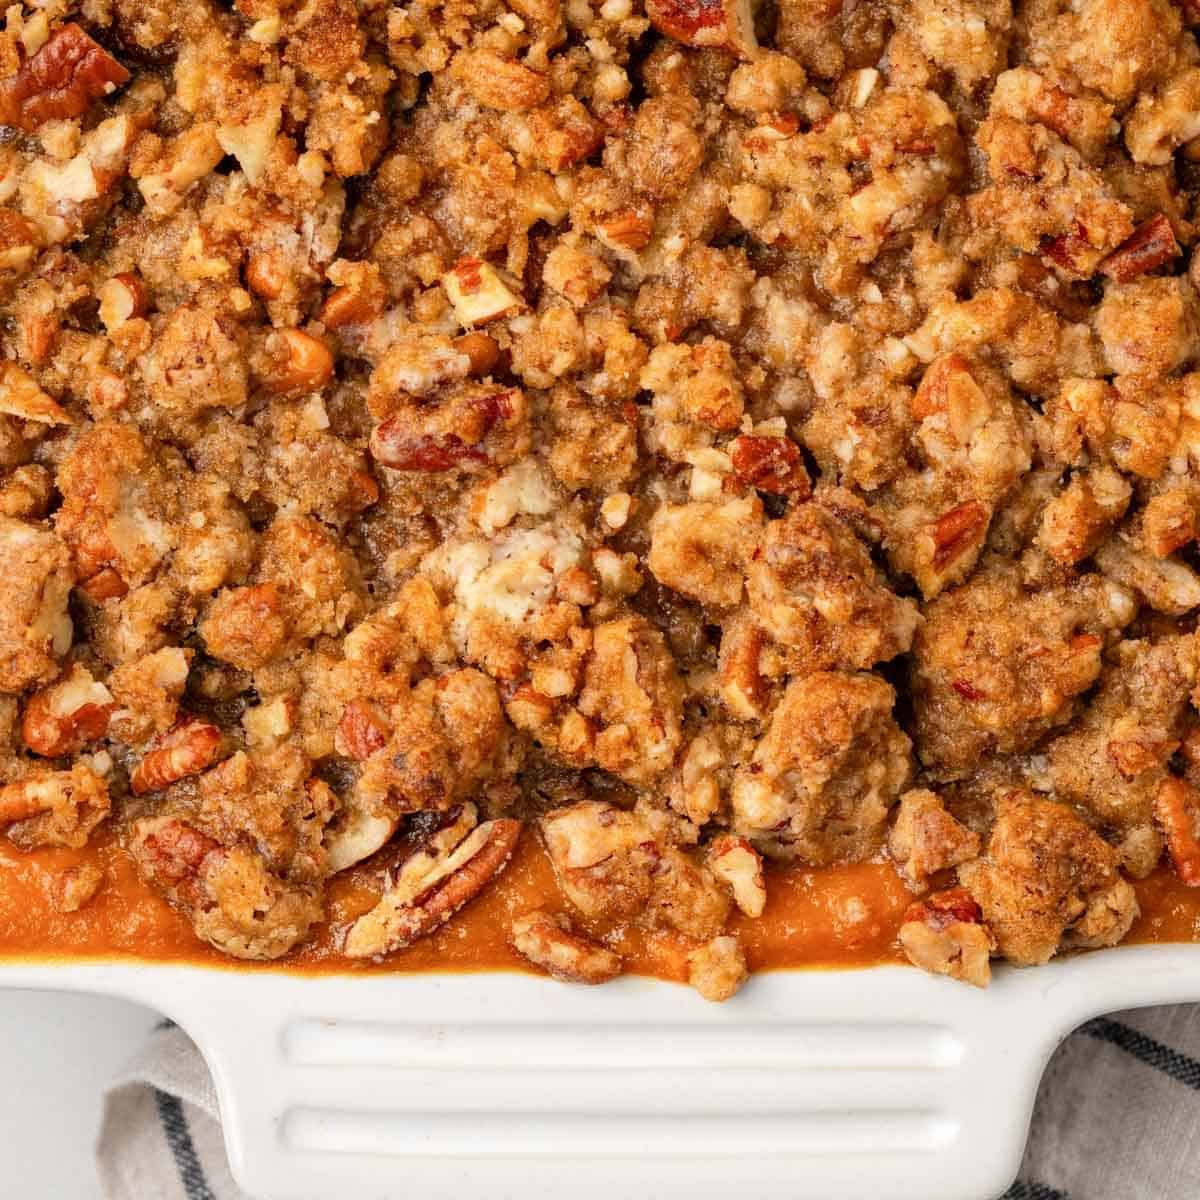 baked sweet potato casserole in white serving dish.